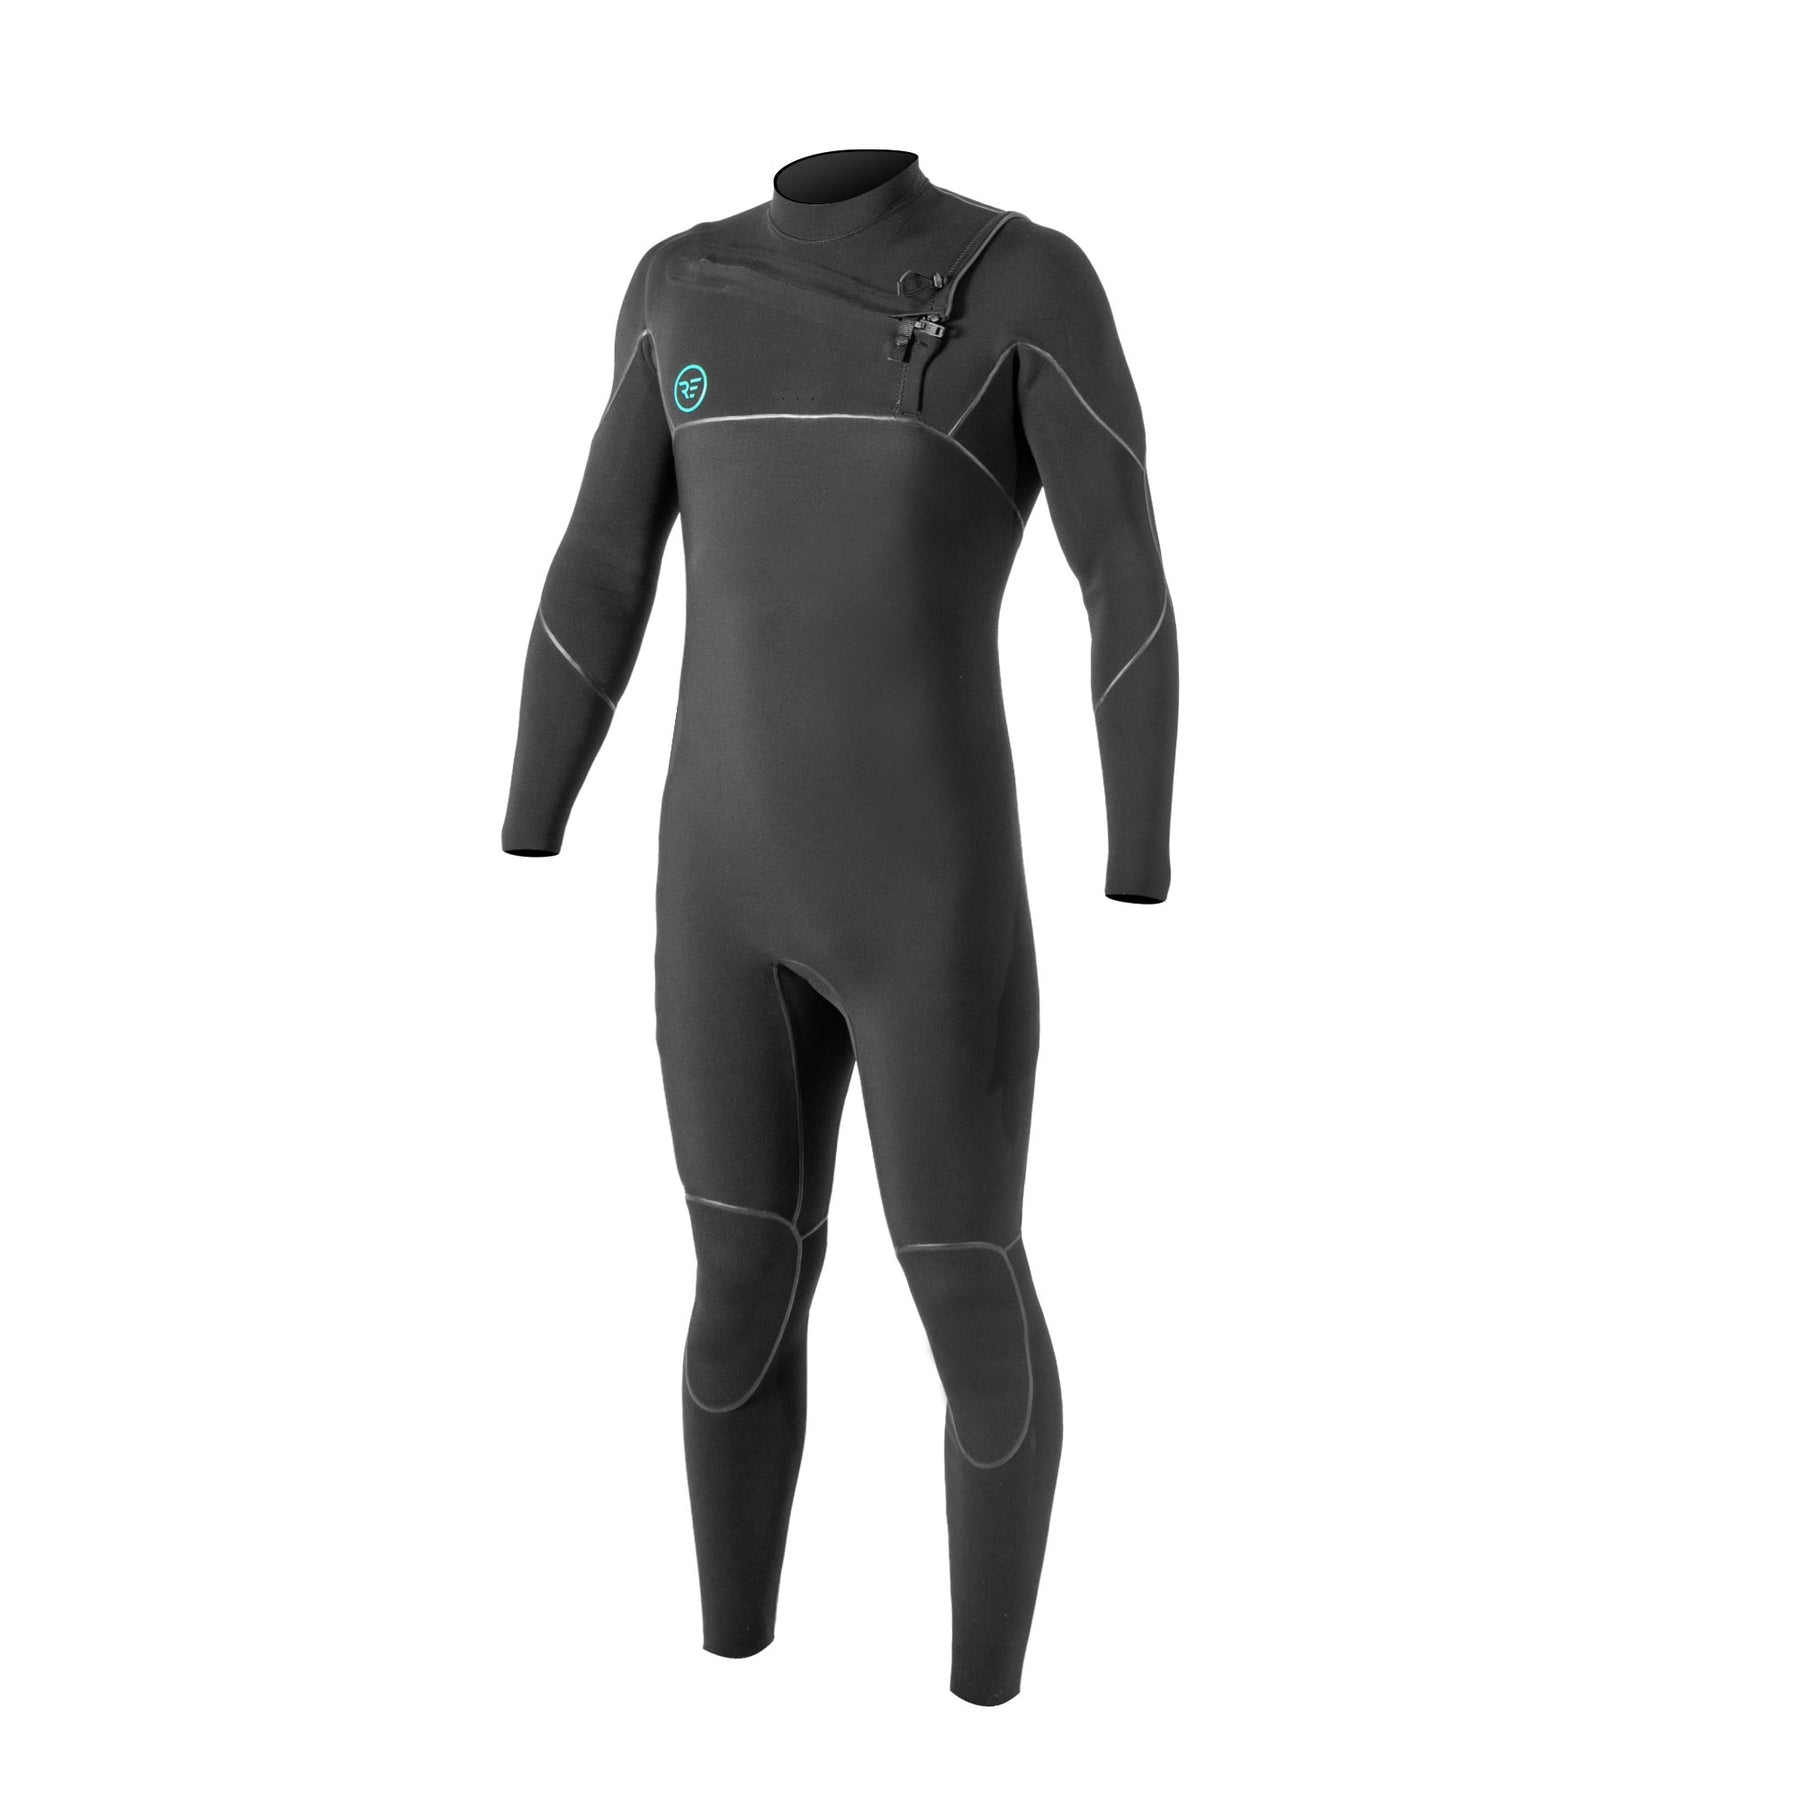 Ride Engine Apoc 5/4/3 FZ Wetsuit – M – The Foiling Collective